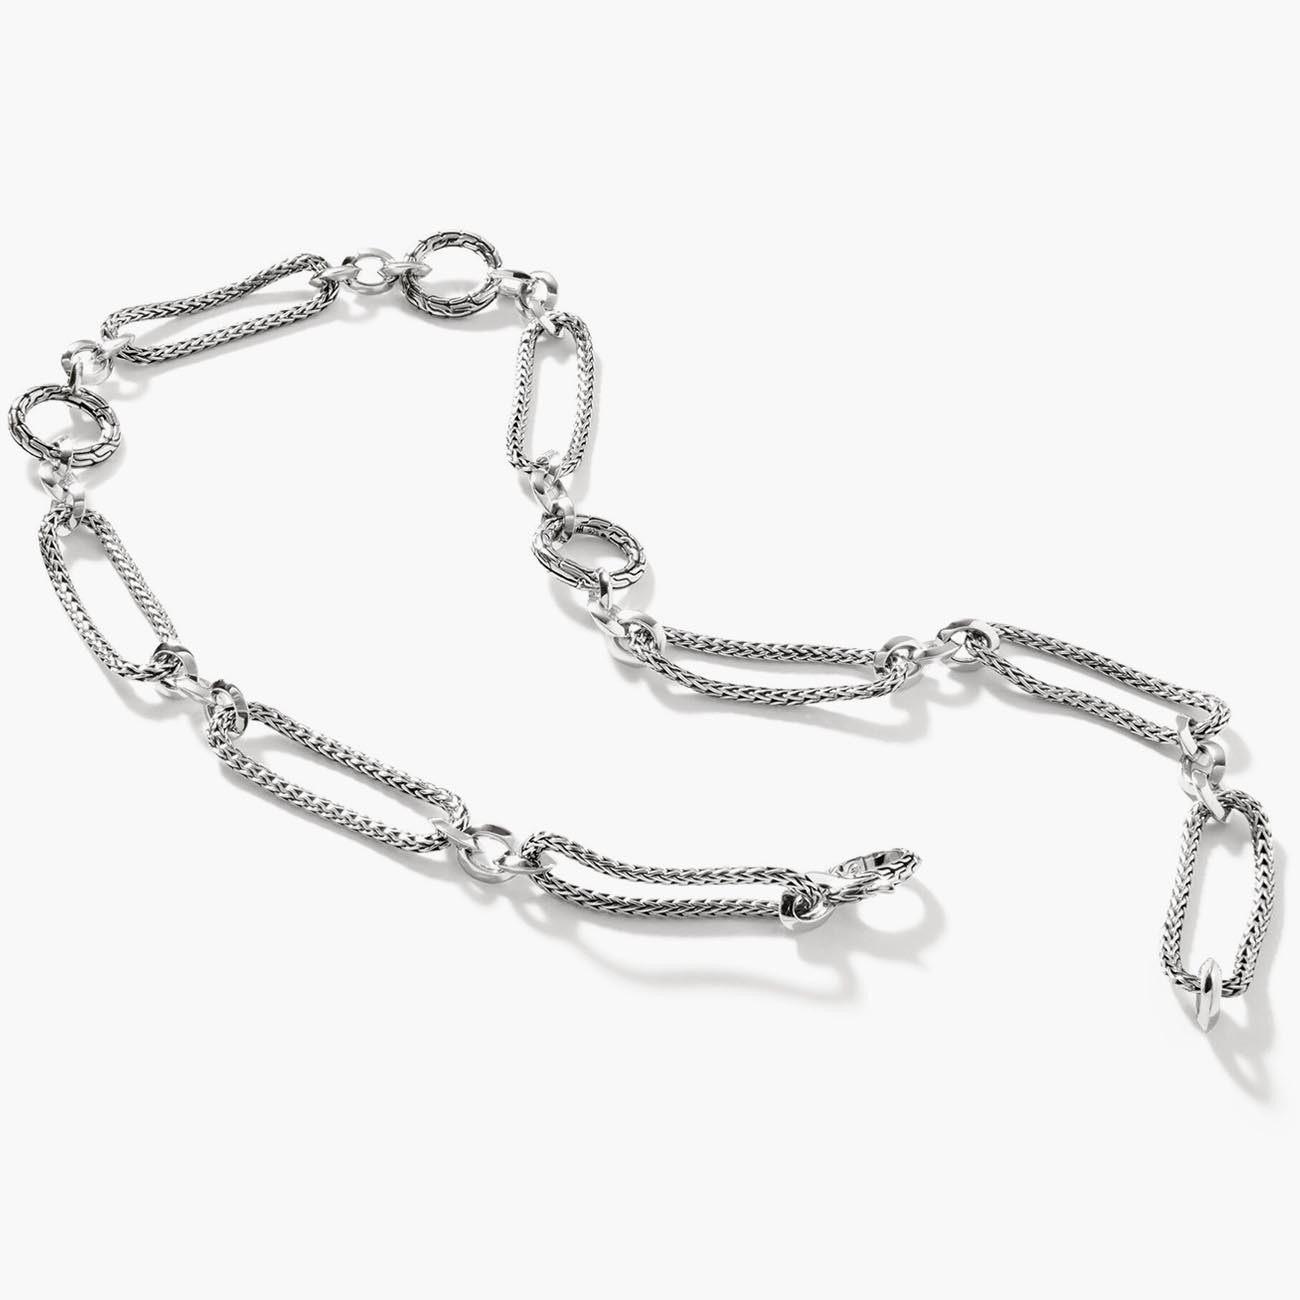 John Hardy Silver Knife Edge Chain Necklace Unclasped